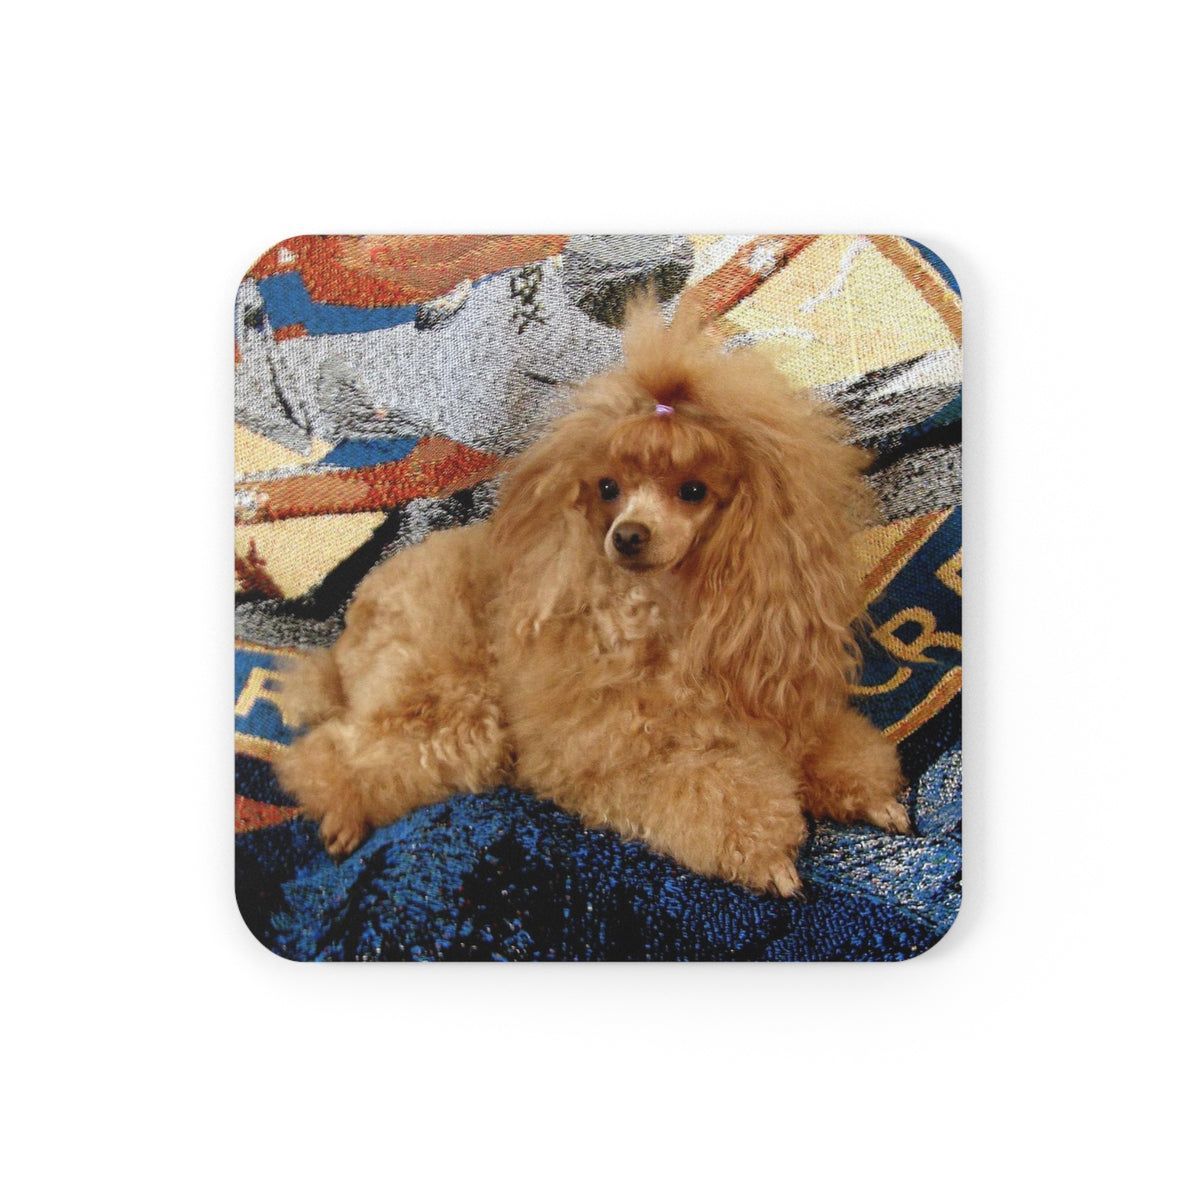 #Poodle Coasters - Set of 4 Hardboard #Coasters - Radiant Red Poodles - Terra Lounging bit.ly/TerraLoungingC… #cctag @Covergirlbeads #RadiantRedPoodles